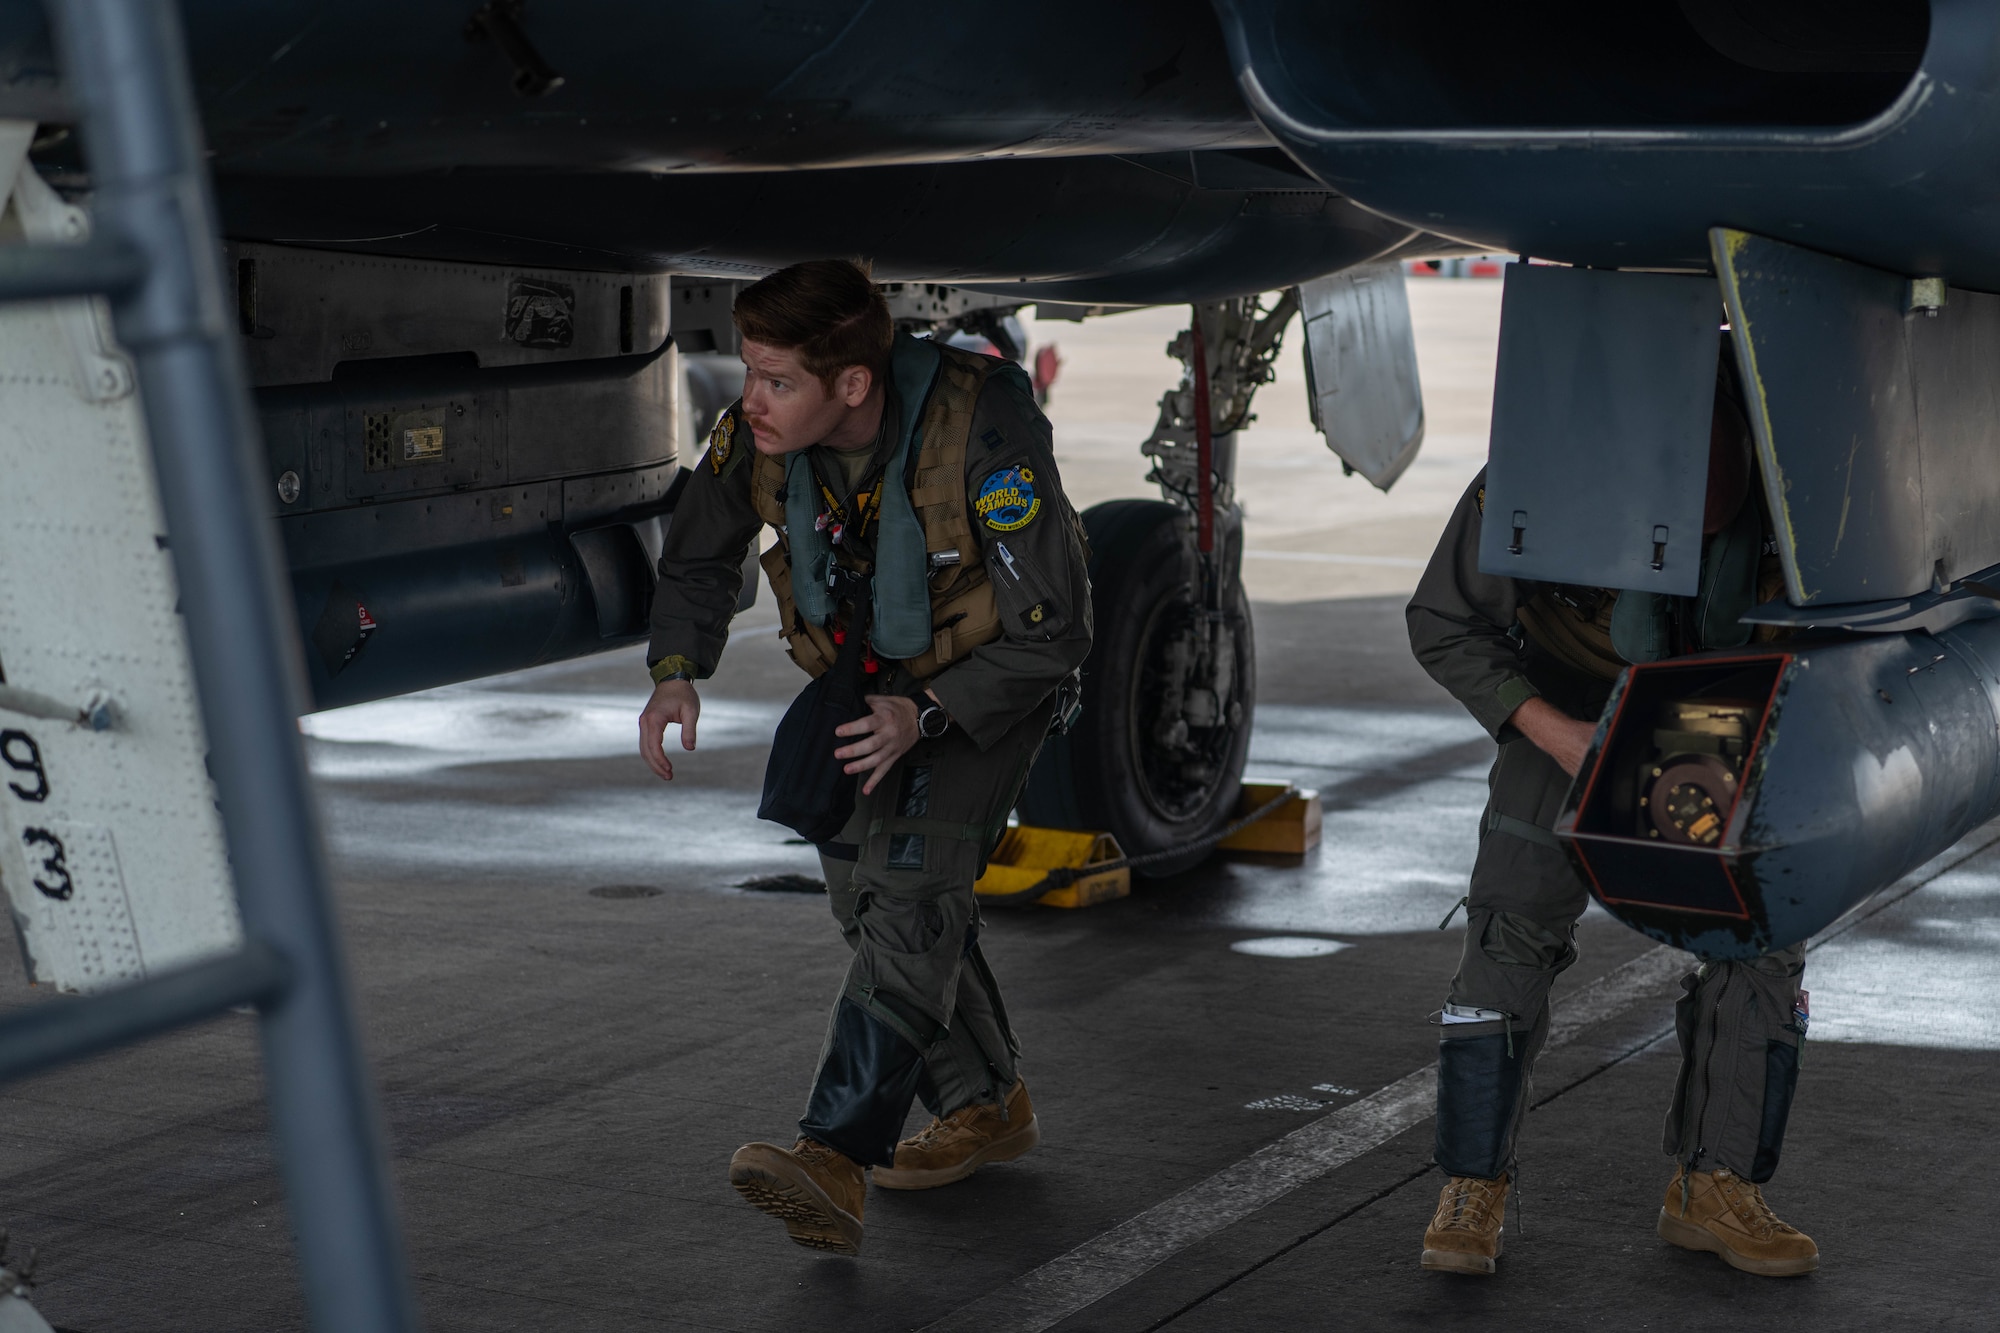 Two pilots conduct inspections on an F-15E Strike Eagle.